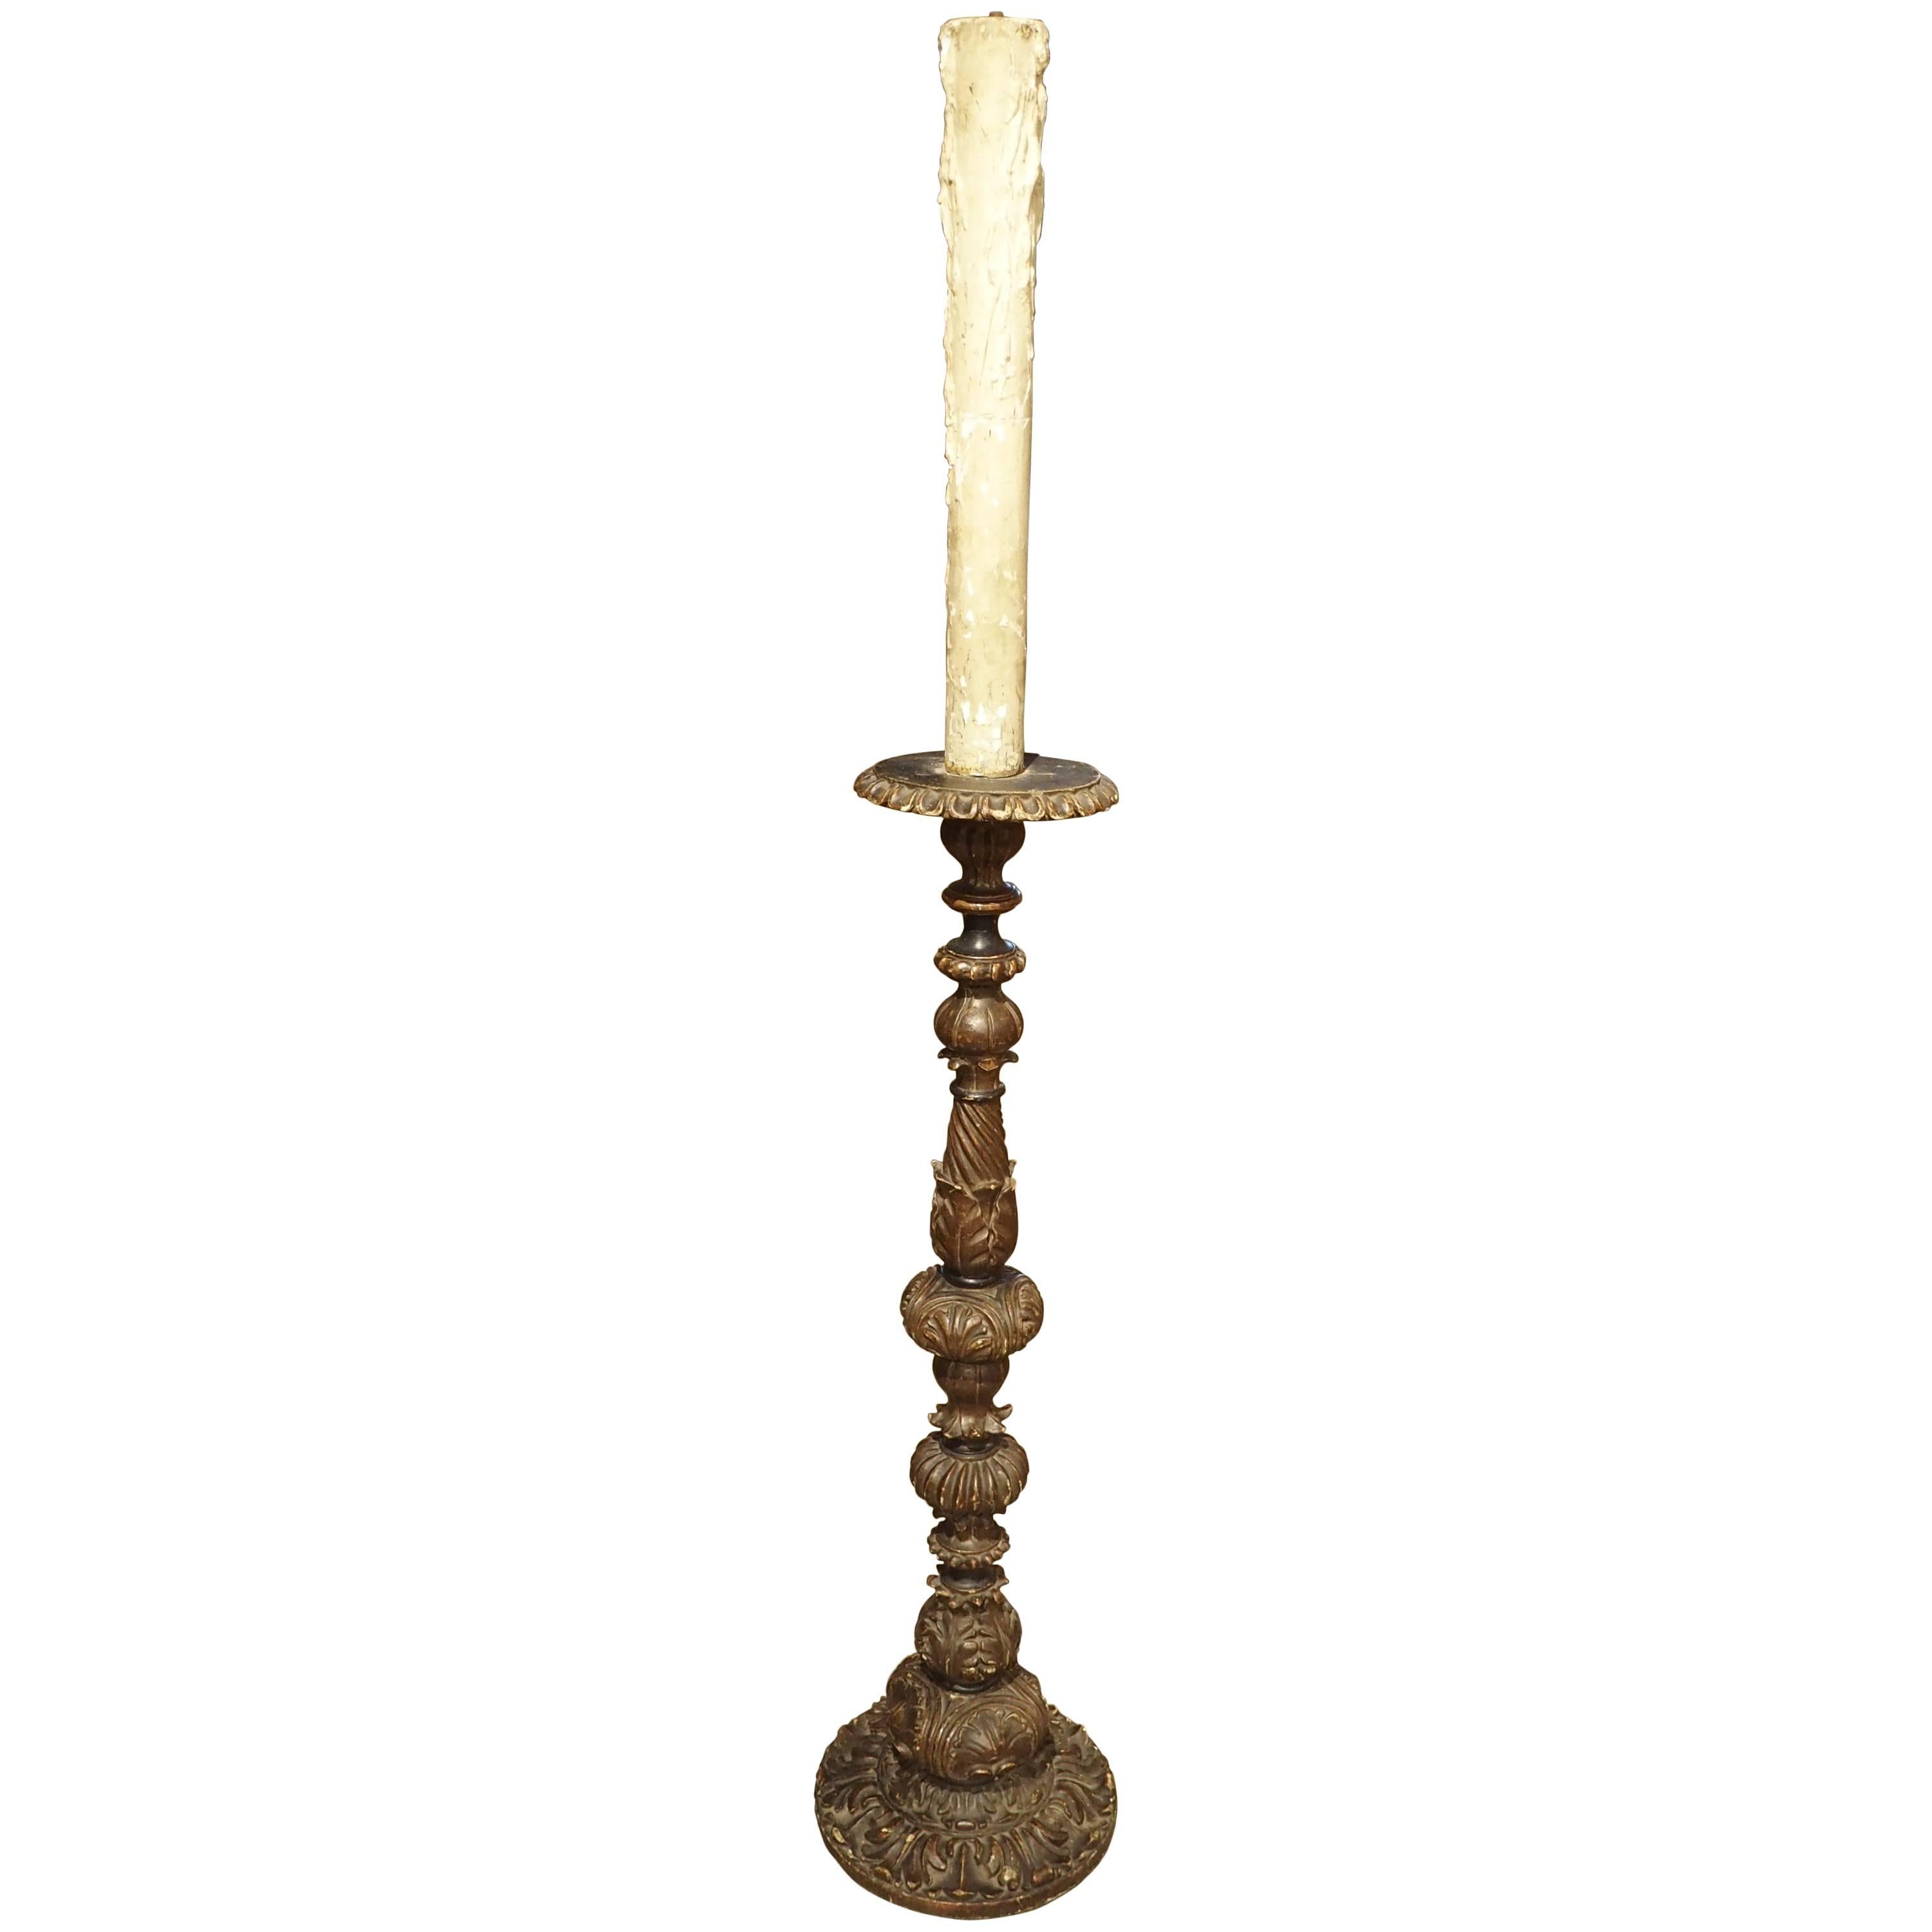 Carved Antique French Floor Candlestick Lamp, circa 1880